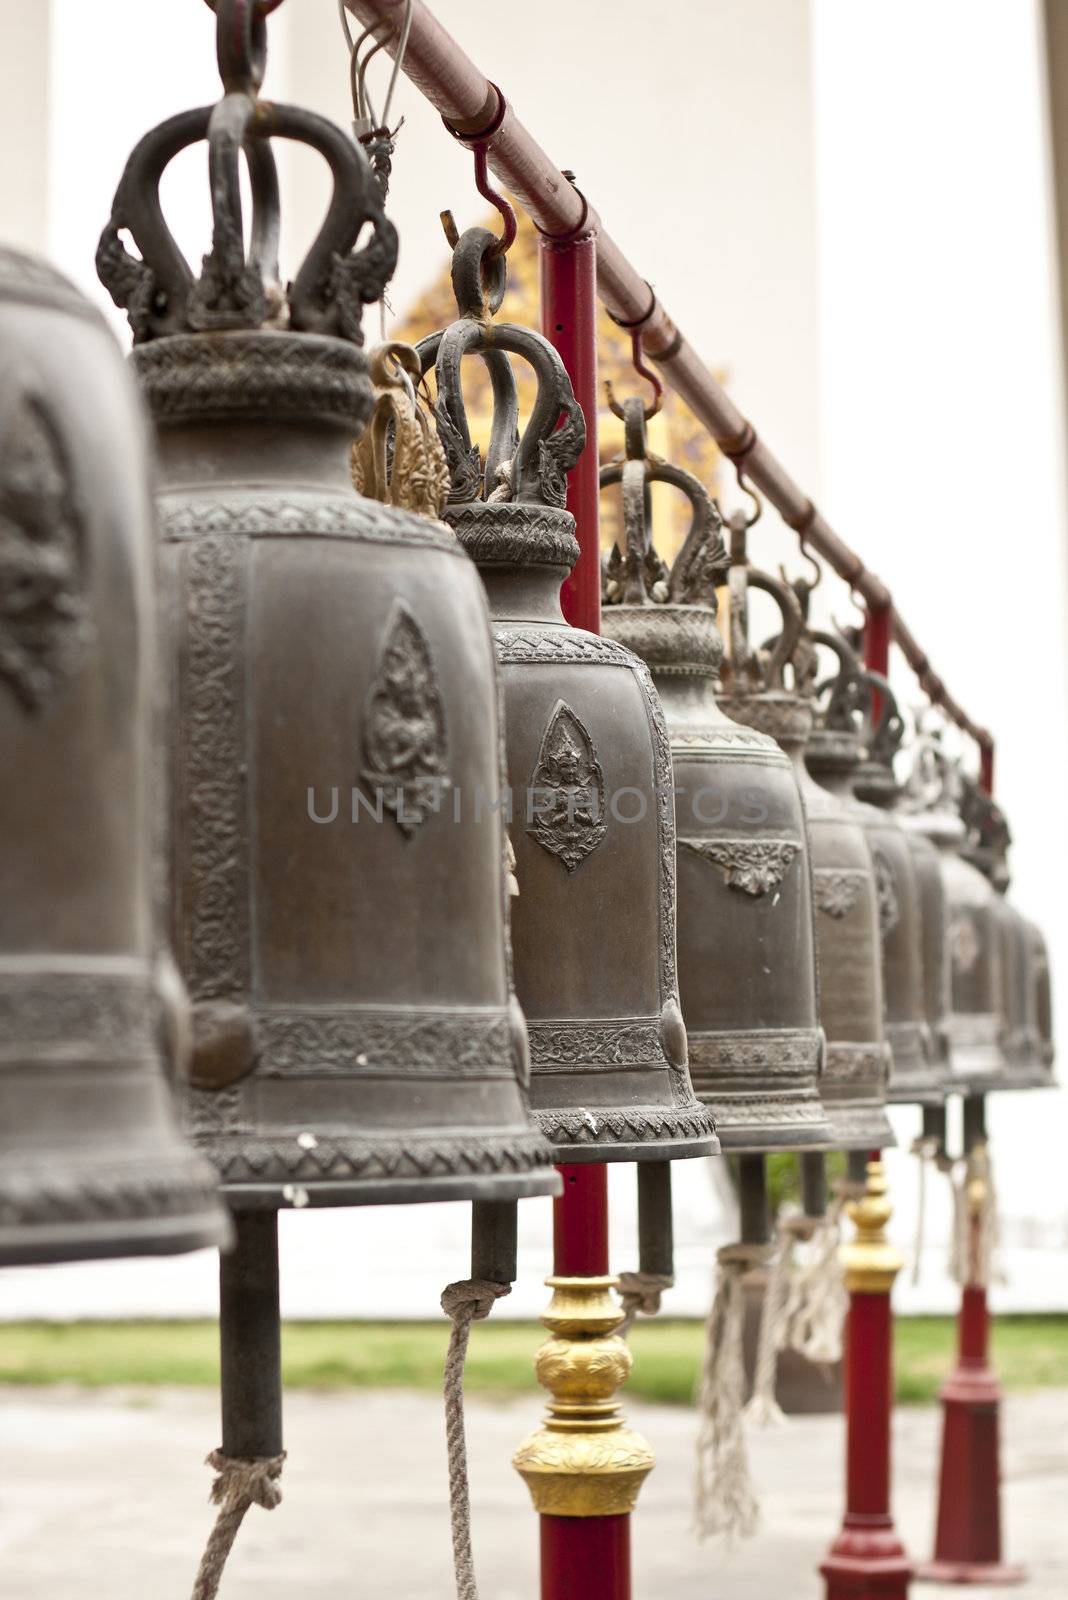 thai bell, created at the temple in Thailand for tapping.